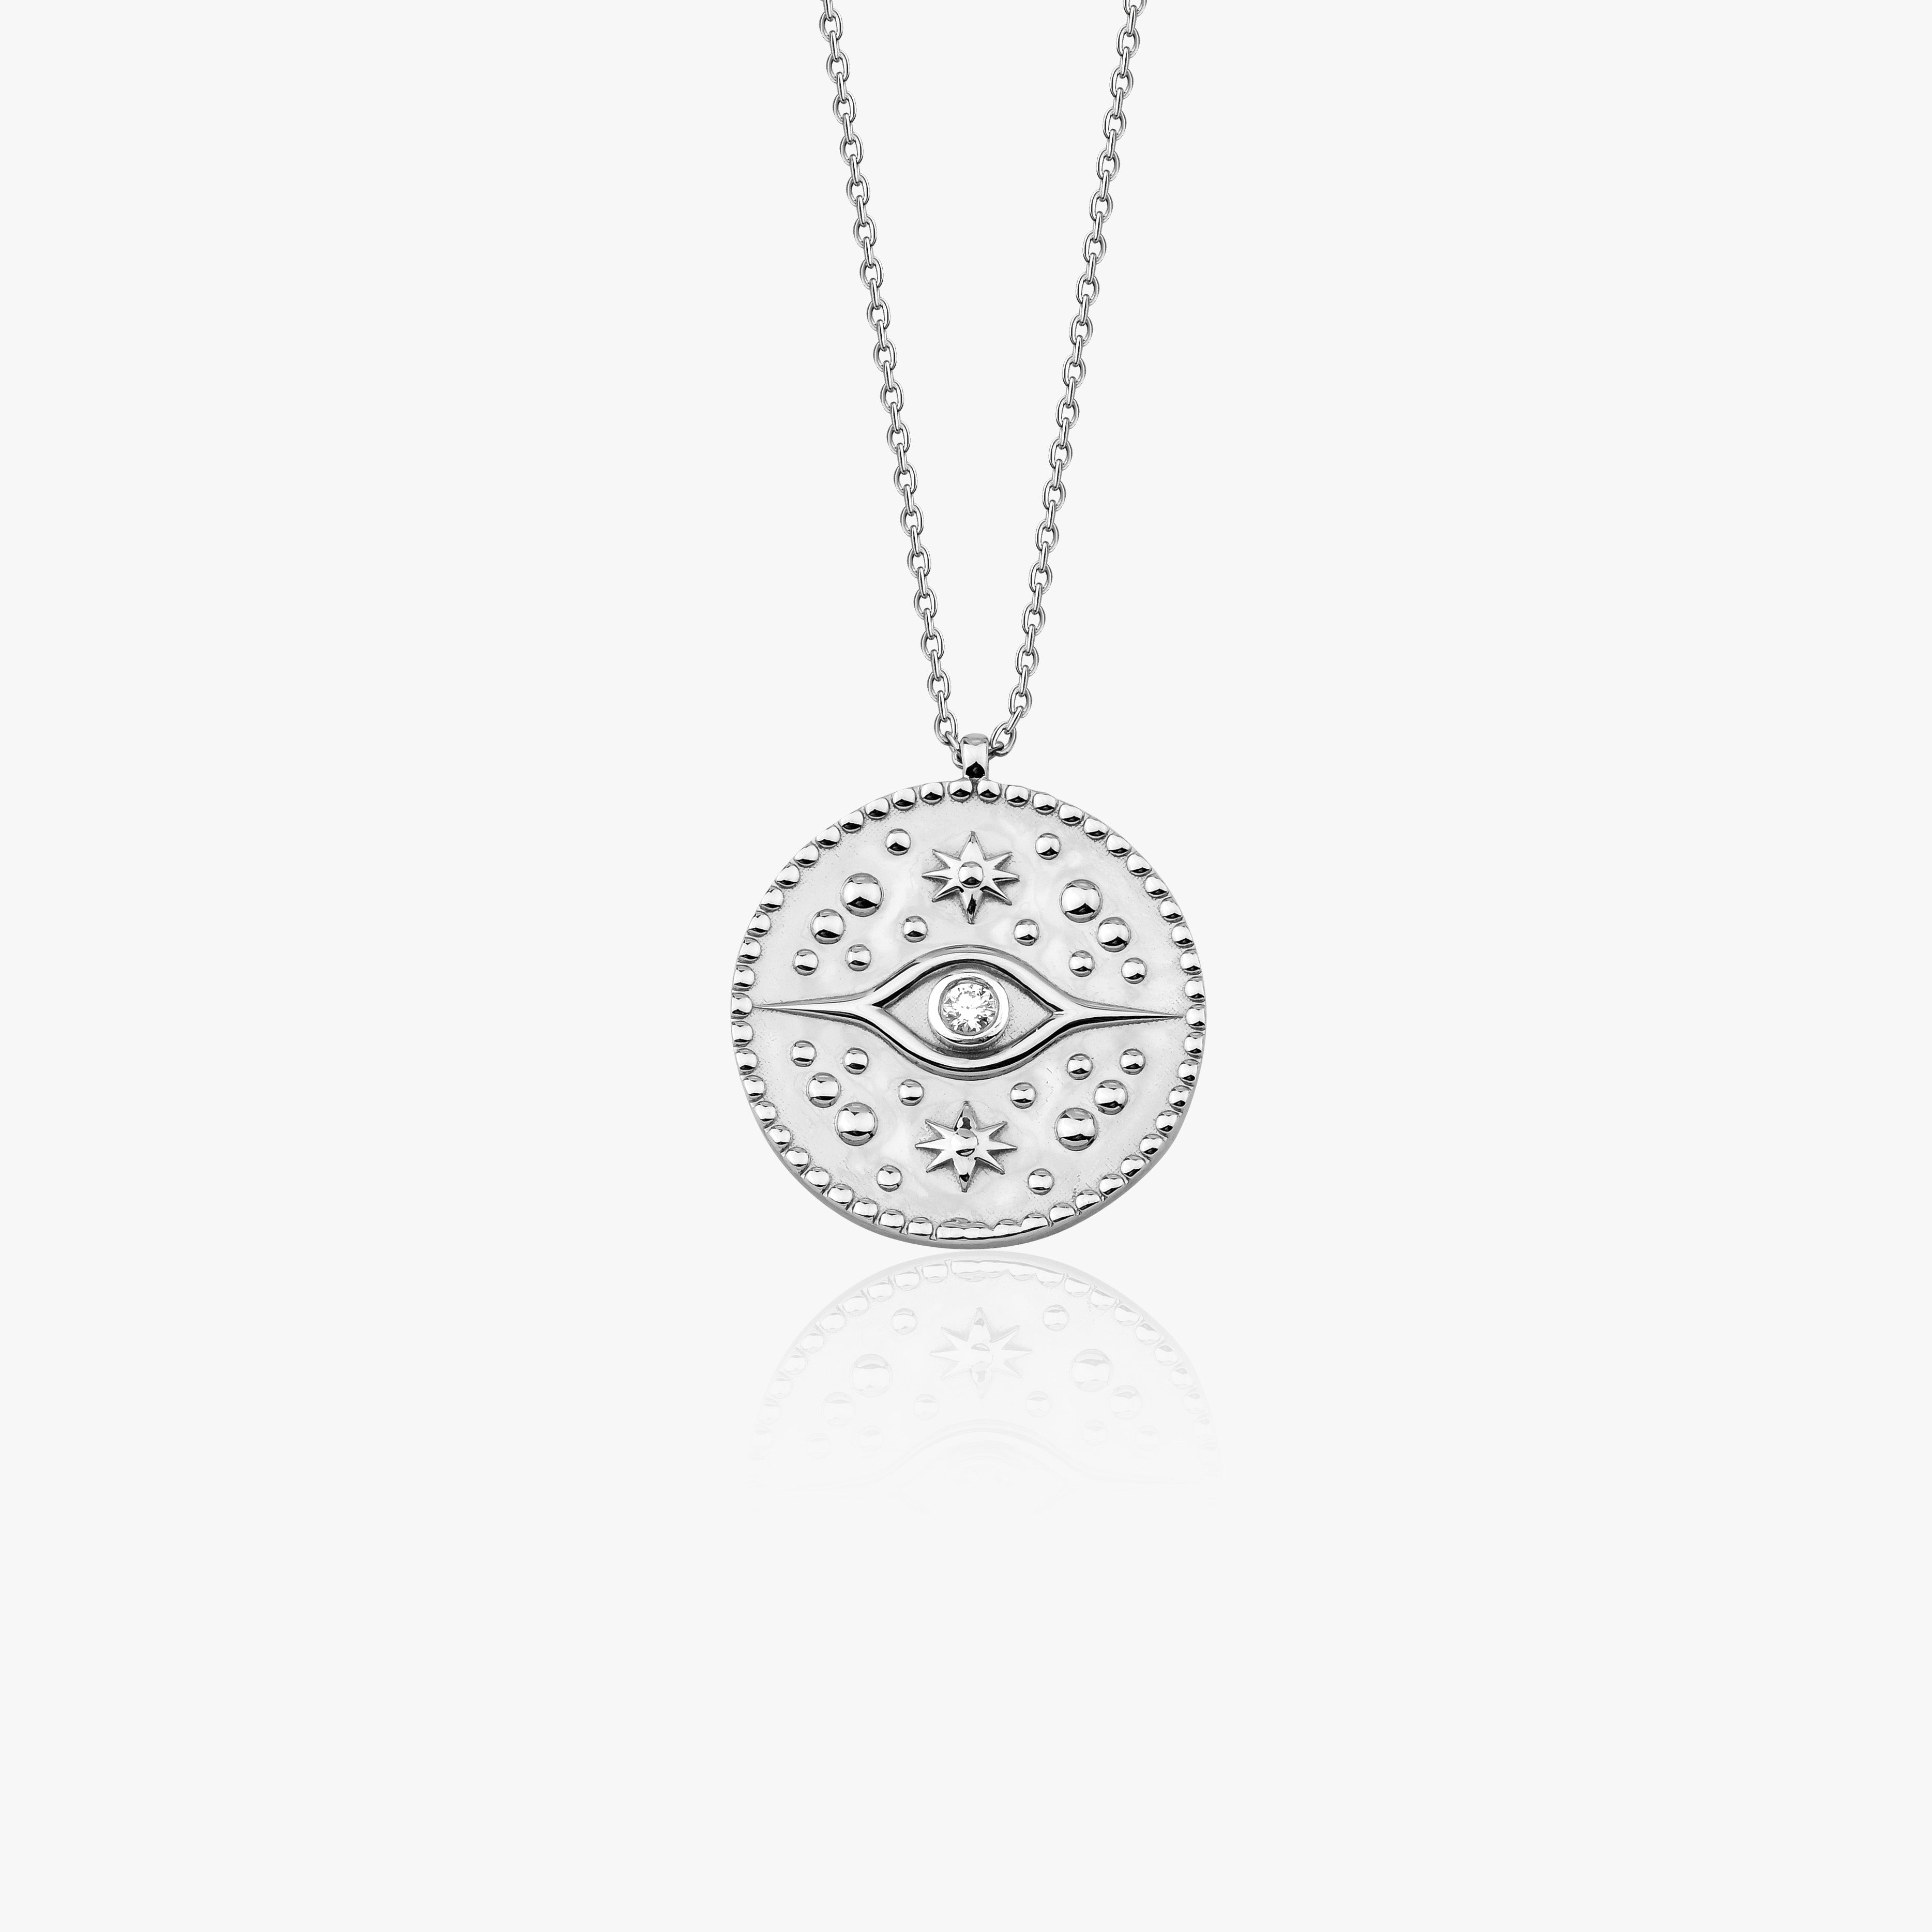 Diamond Medallion Coin Necklace Available in 14K and 18K Gold